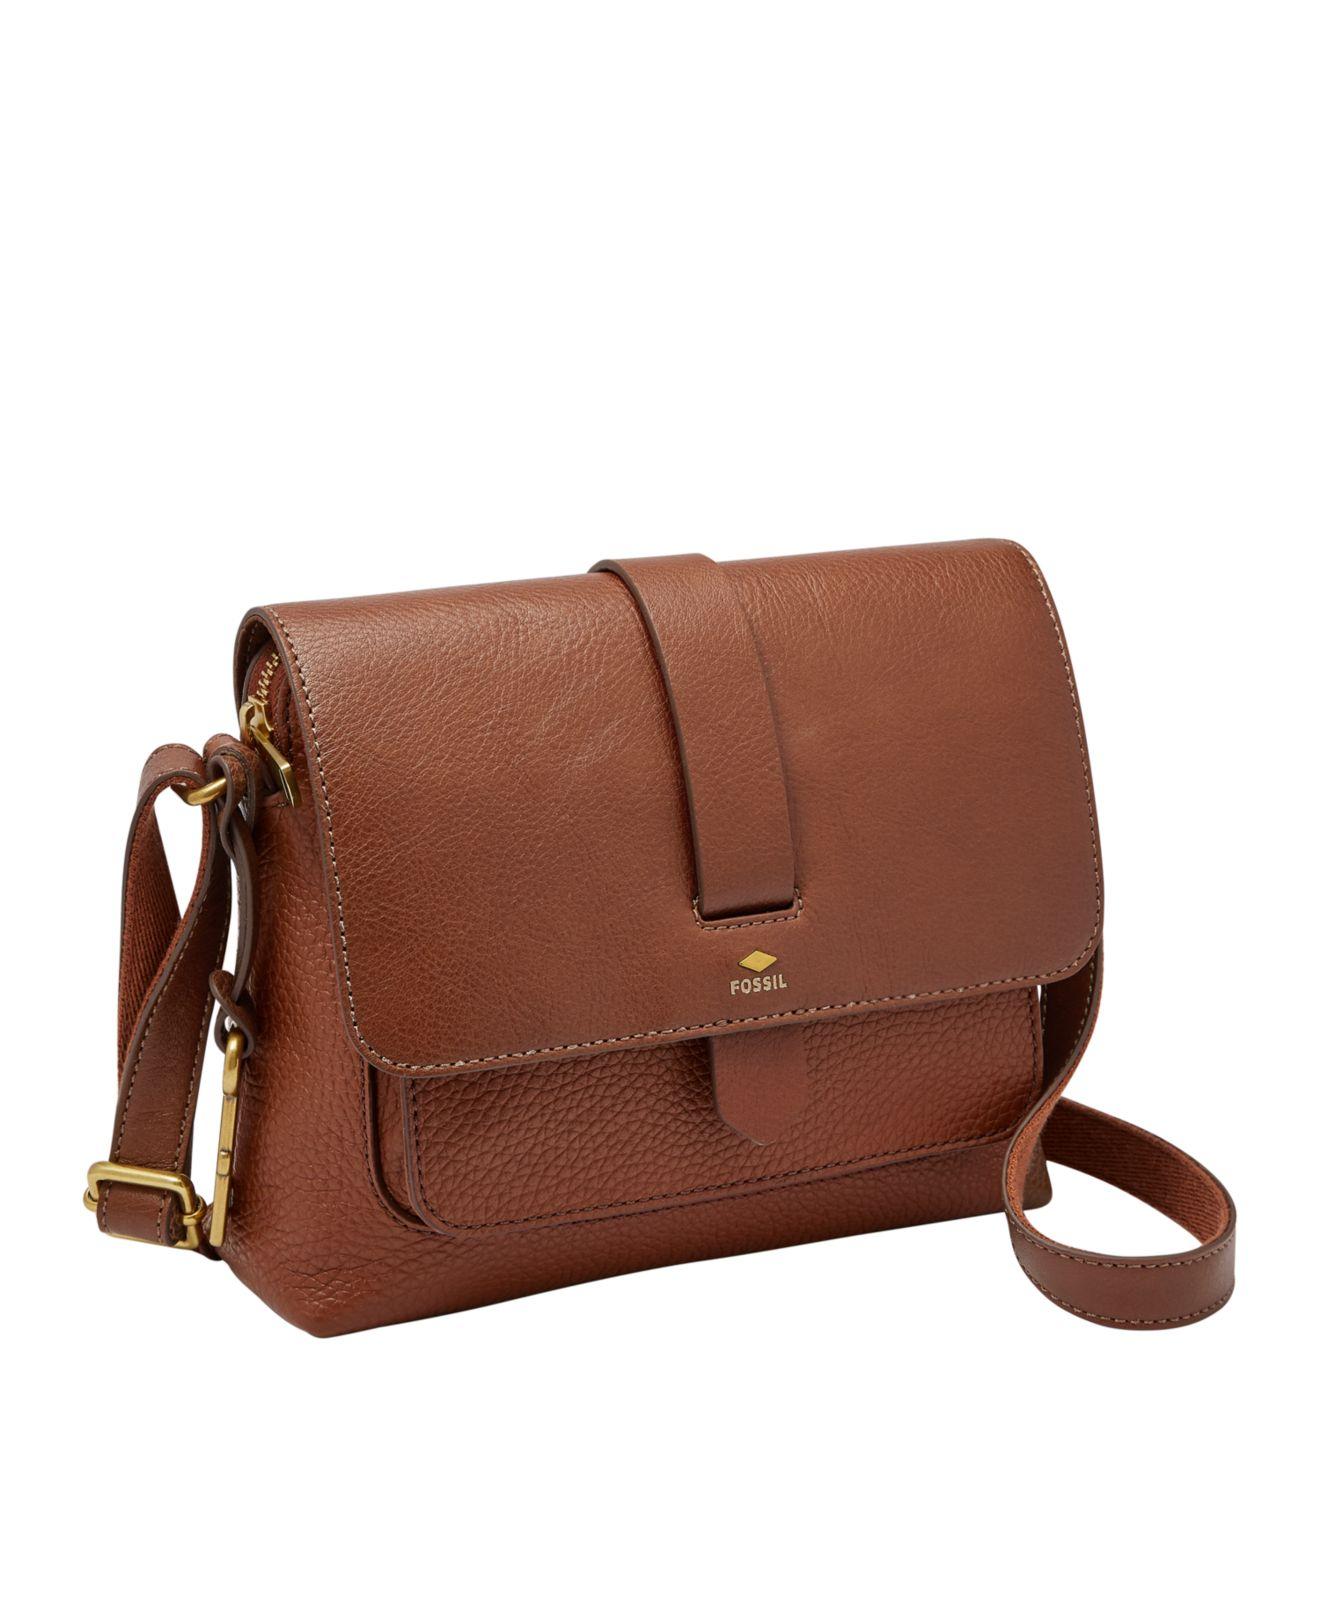 Fossil Kinley Small Leather Crossbody in Brown/Gold (Brown) - Lyst